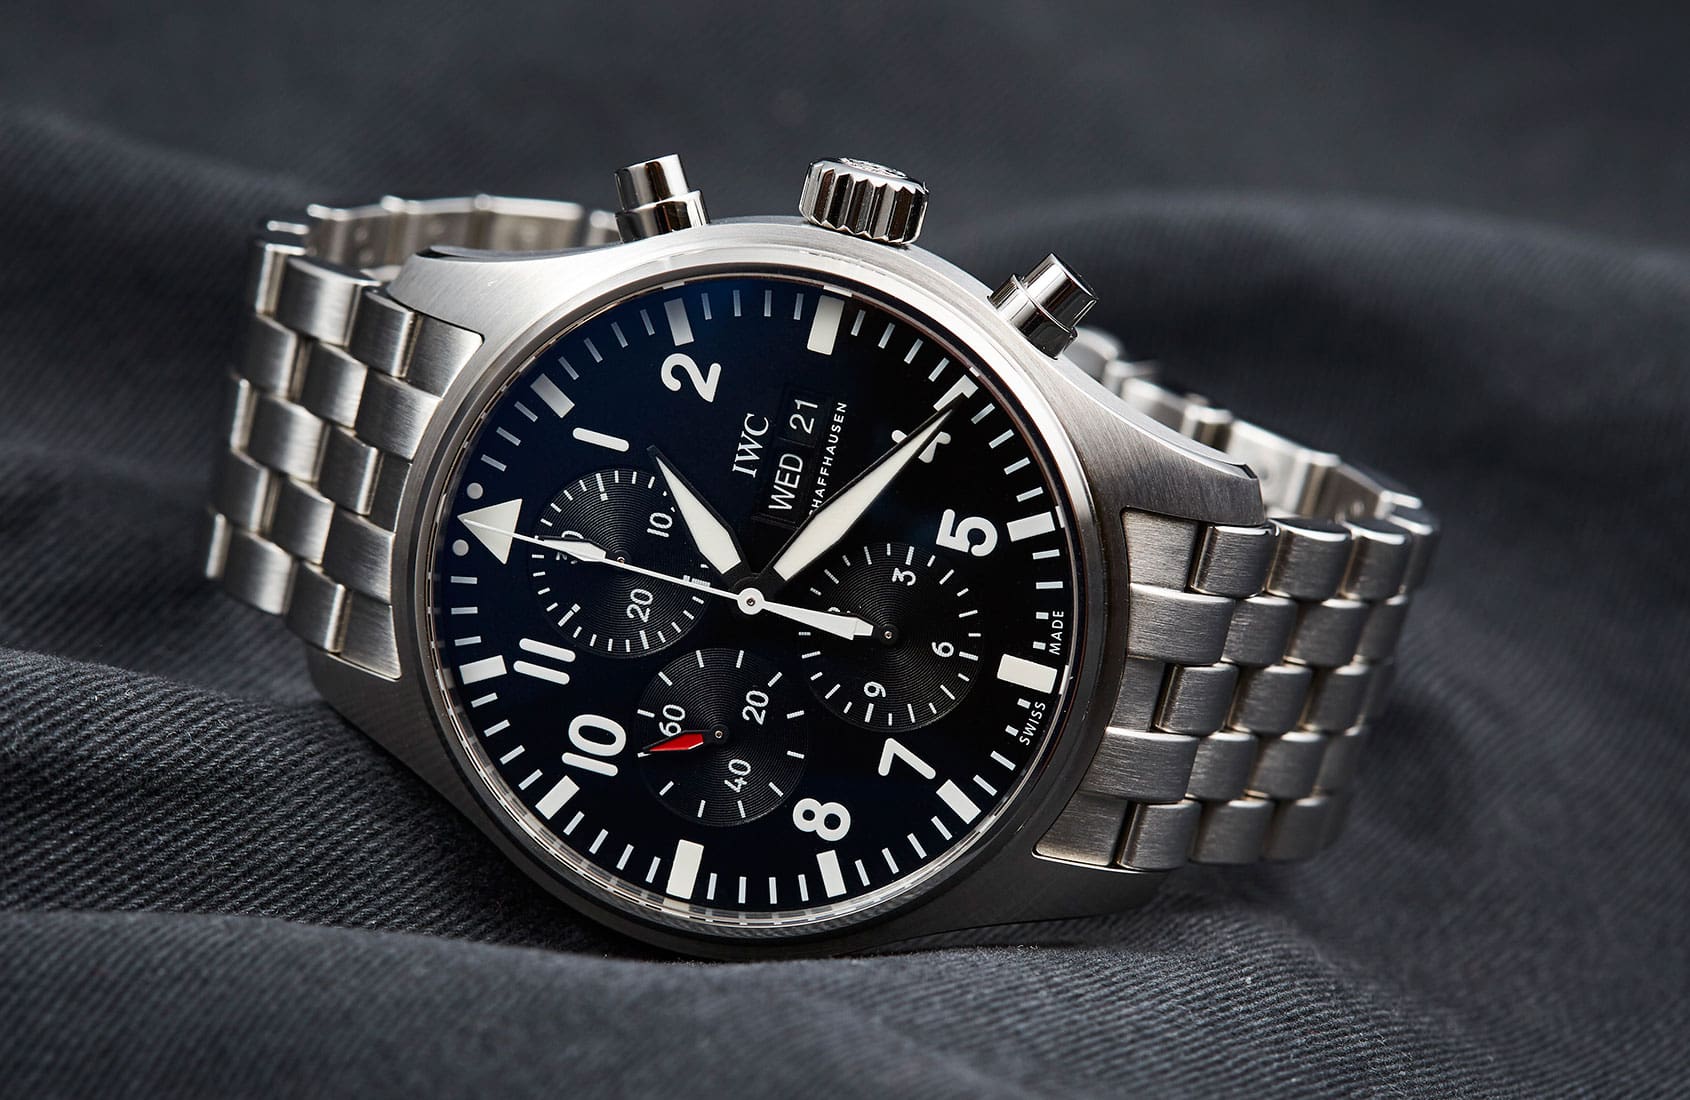 HANDS-ON: The 2016 IWC Pilot’s Chronograph hits new heights